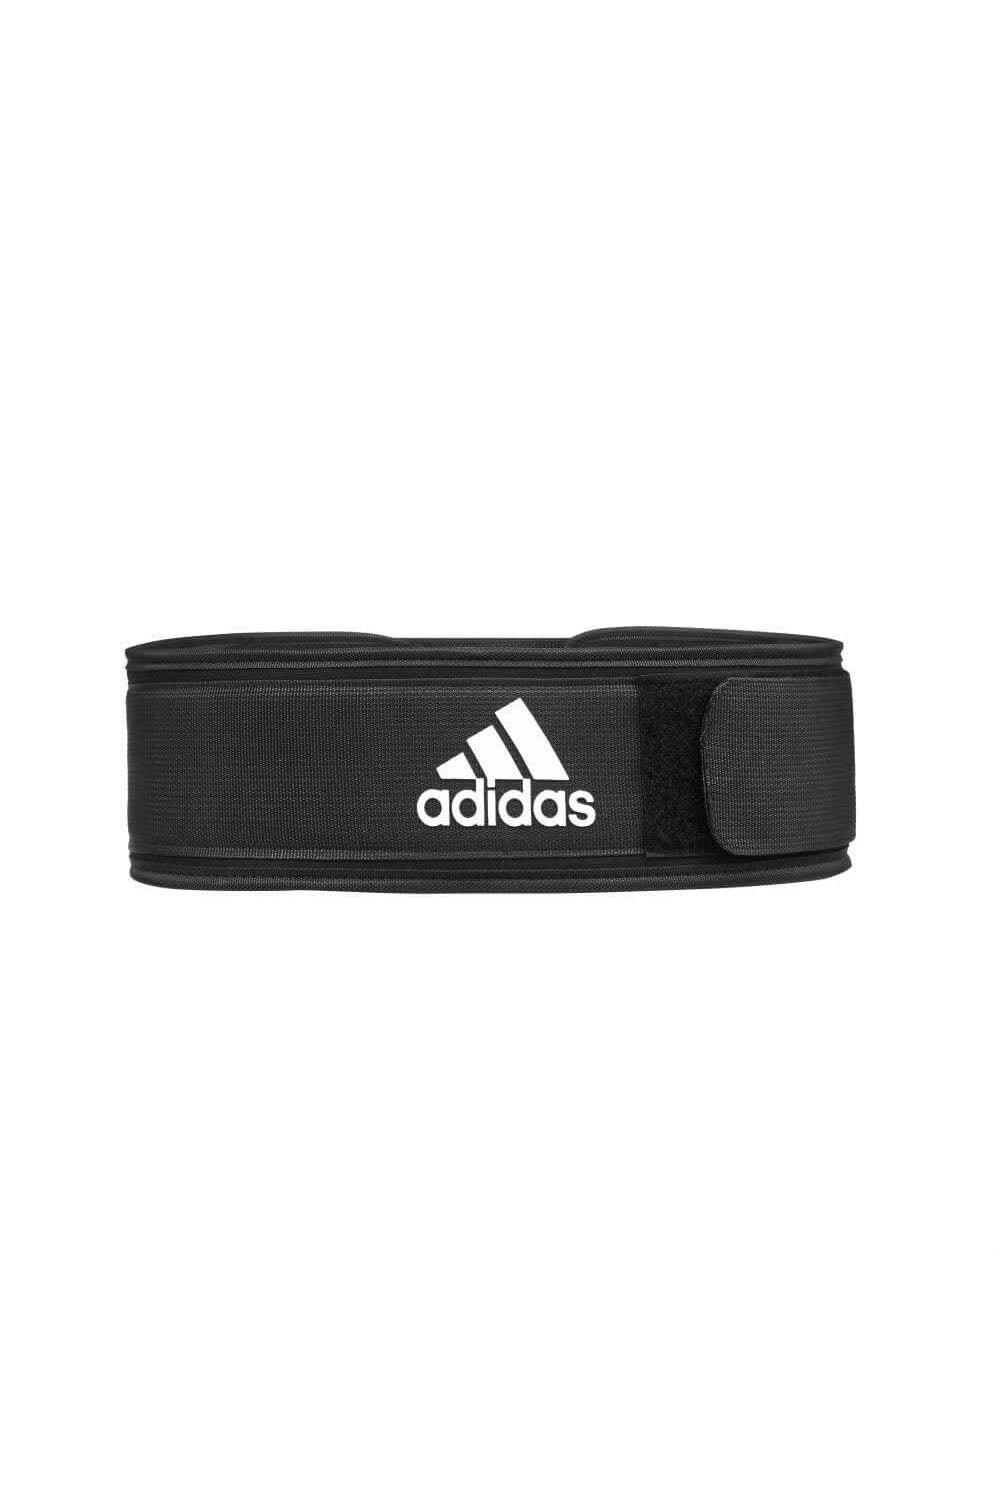 Adidas Essential Weight Lifting Belt|Size: S|black